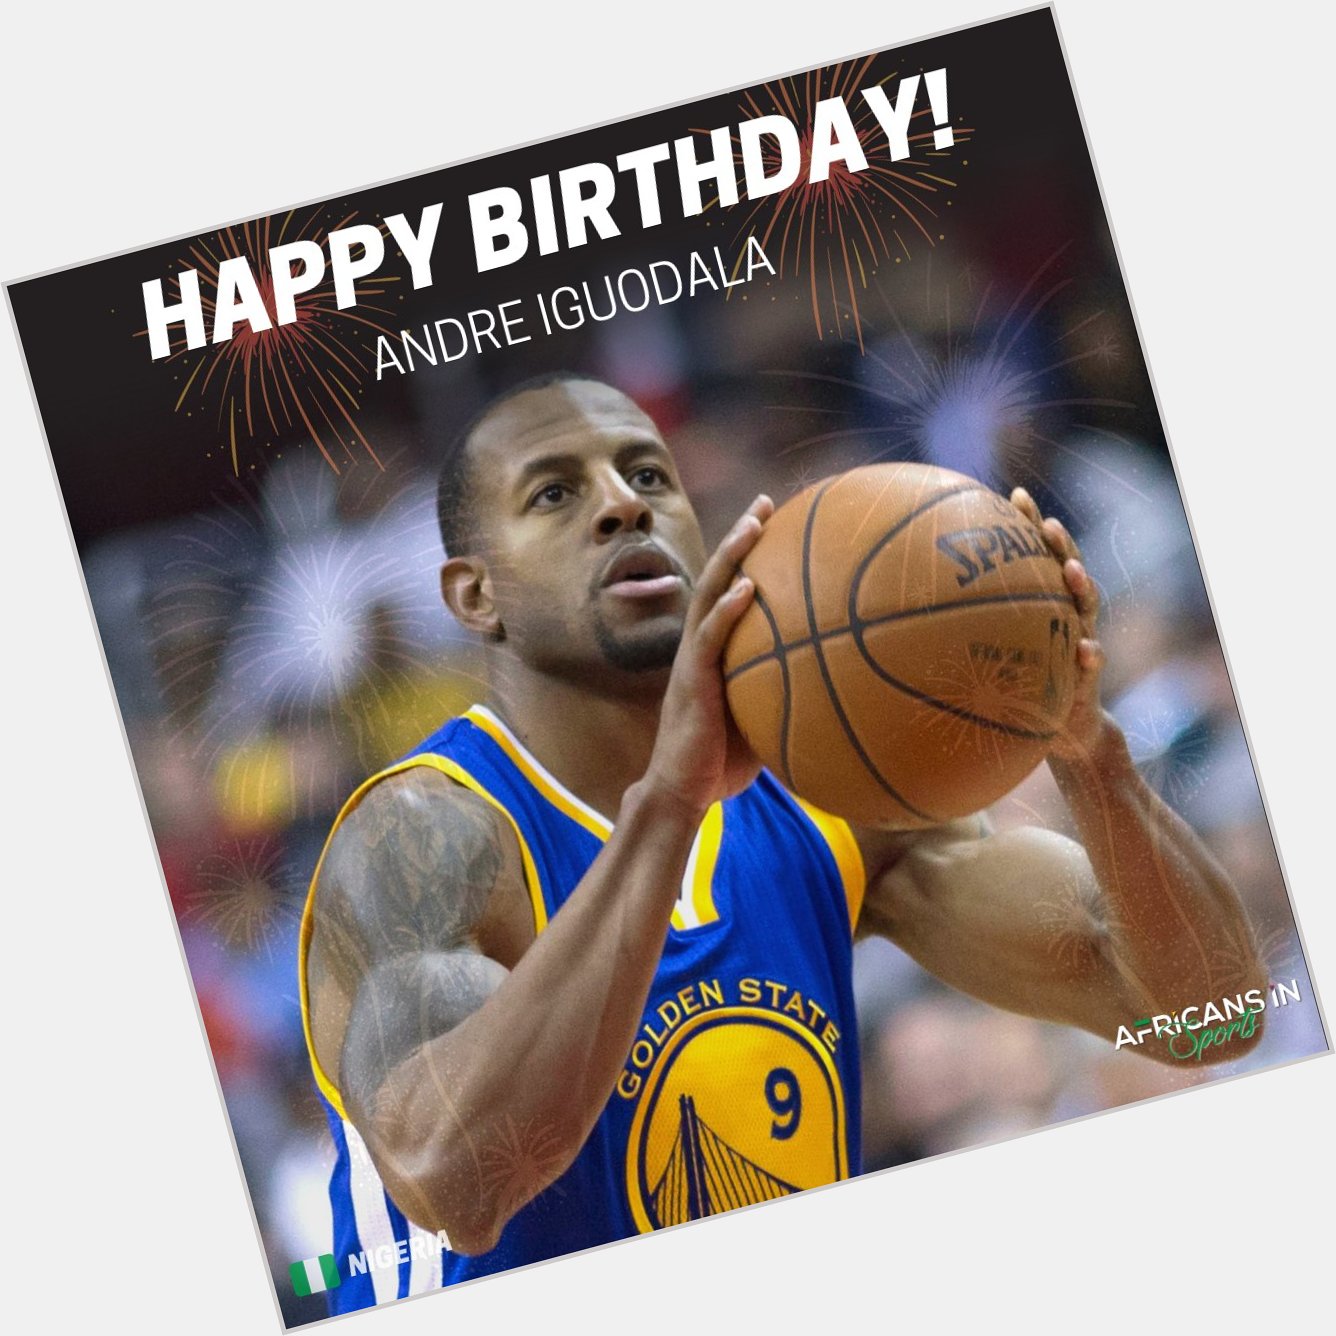 Happy Birthday to Professional Basketballer, Andre Iguodala  -
Send him some love via the comment section 